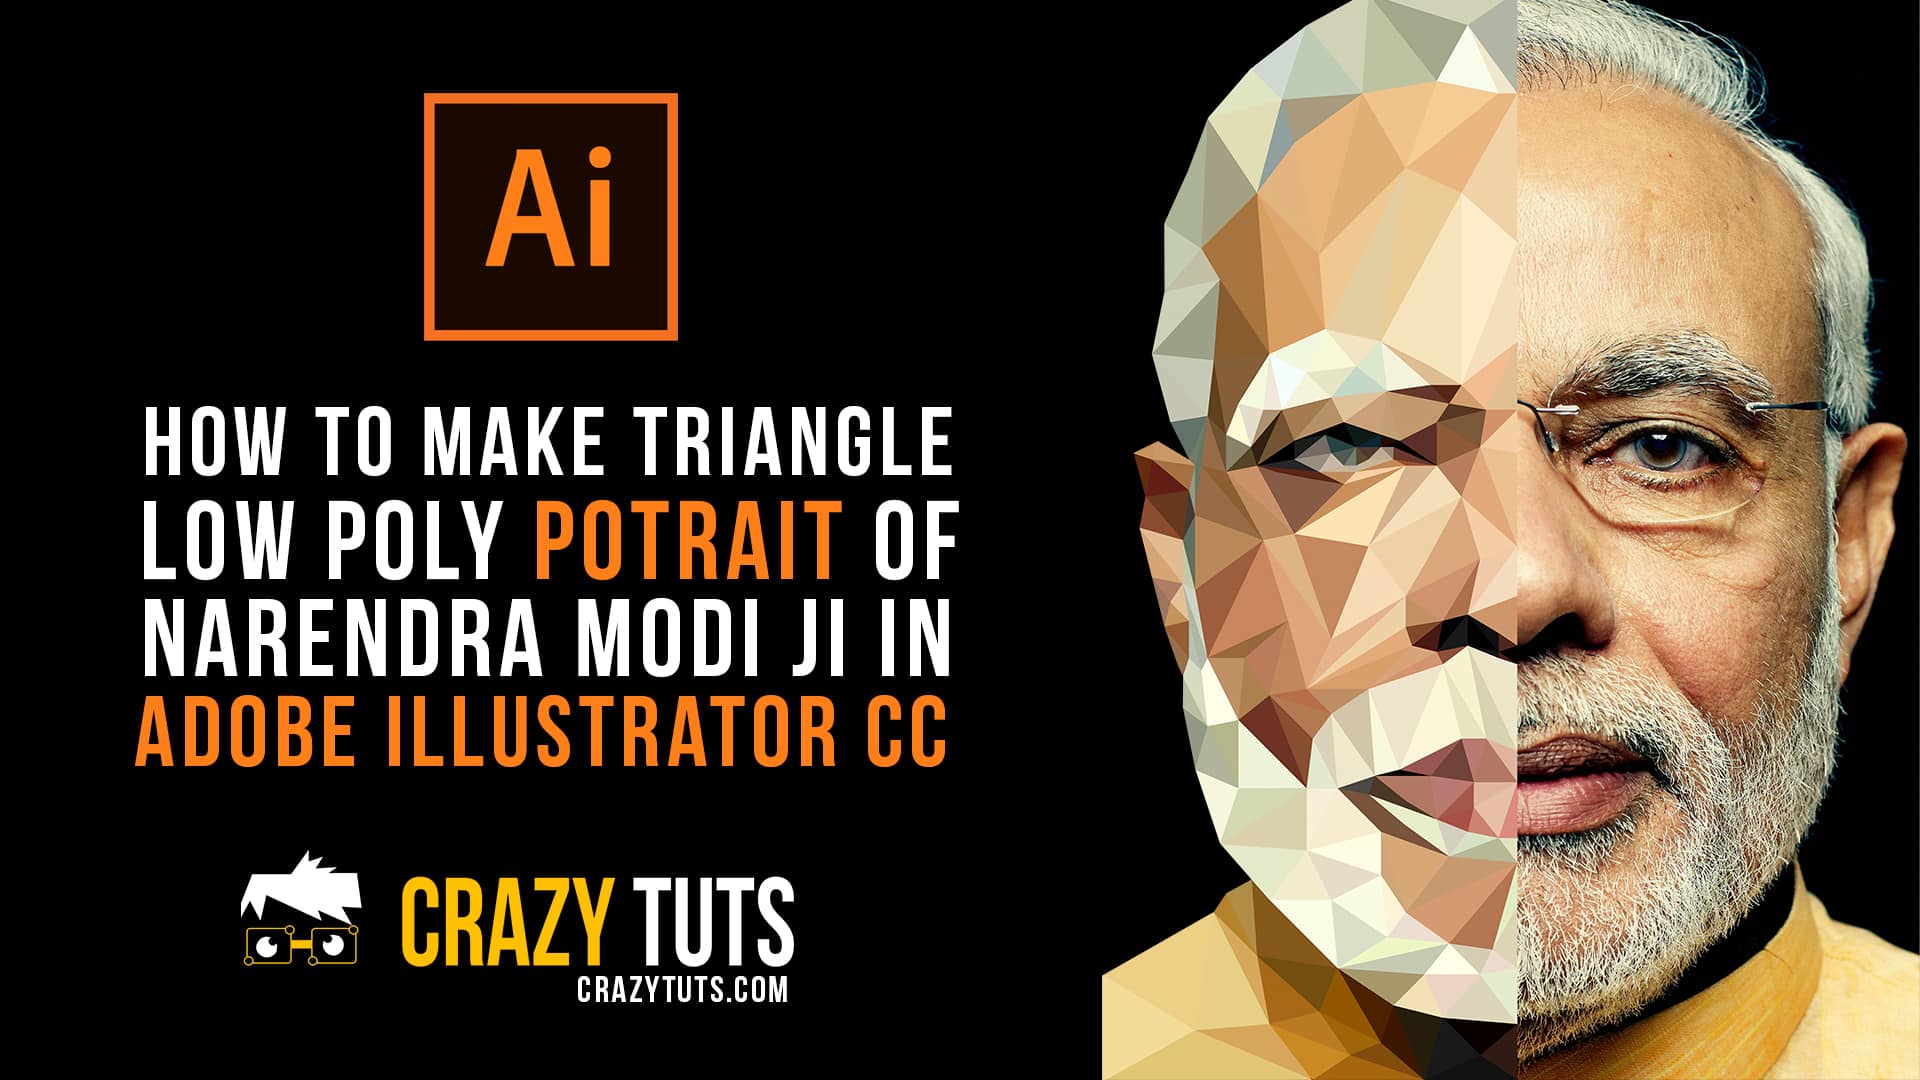 The most trusted mobile car repair service. Triangle Low Poly Portrait of Narendra Modi ji (PM of